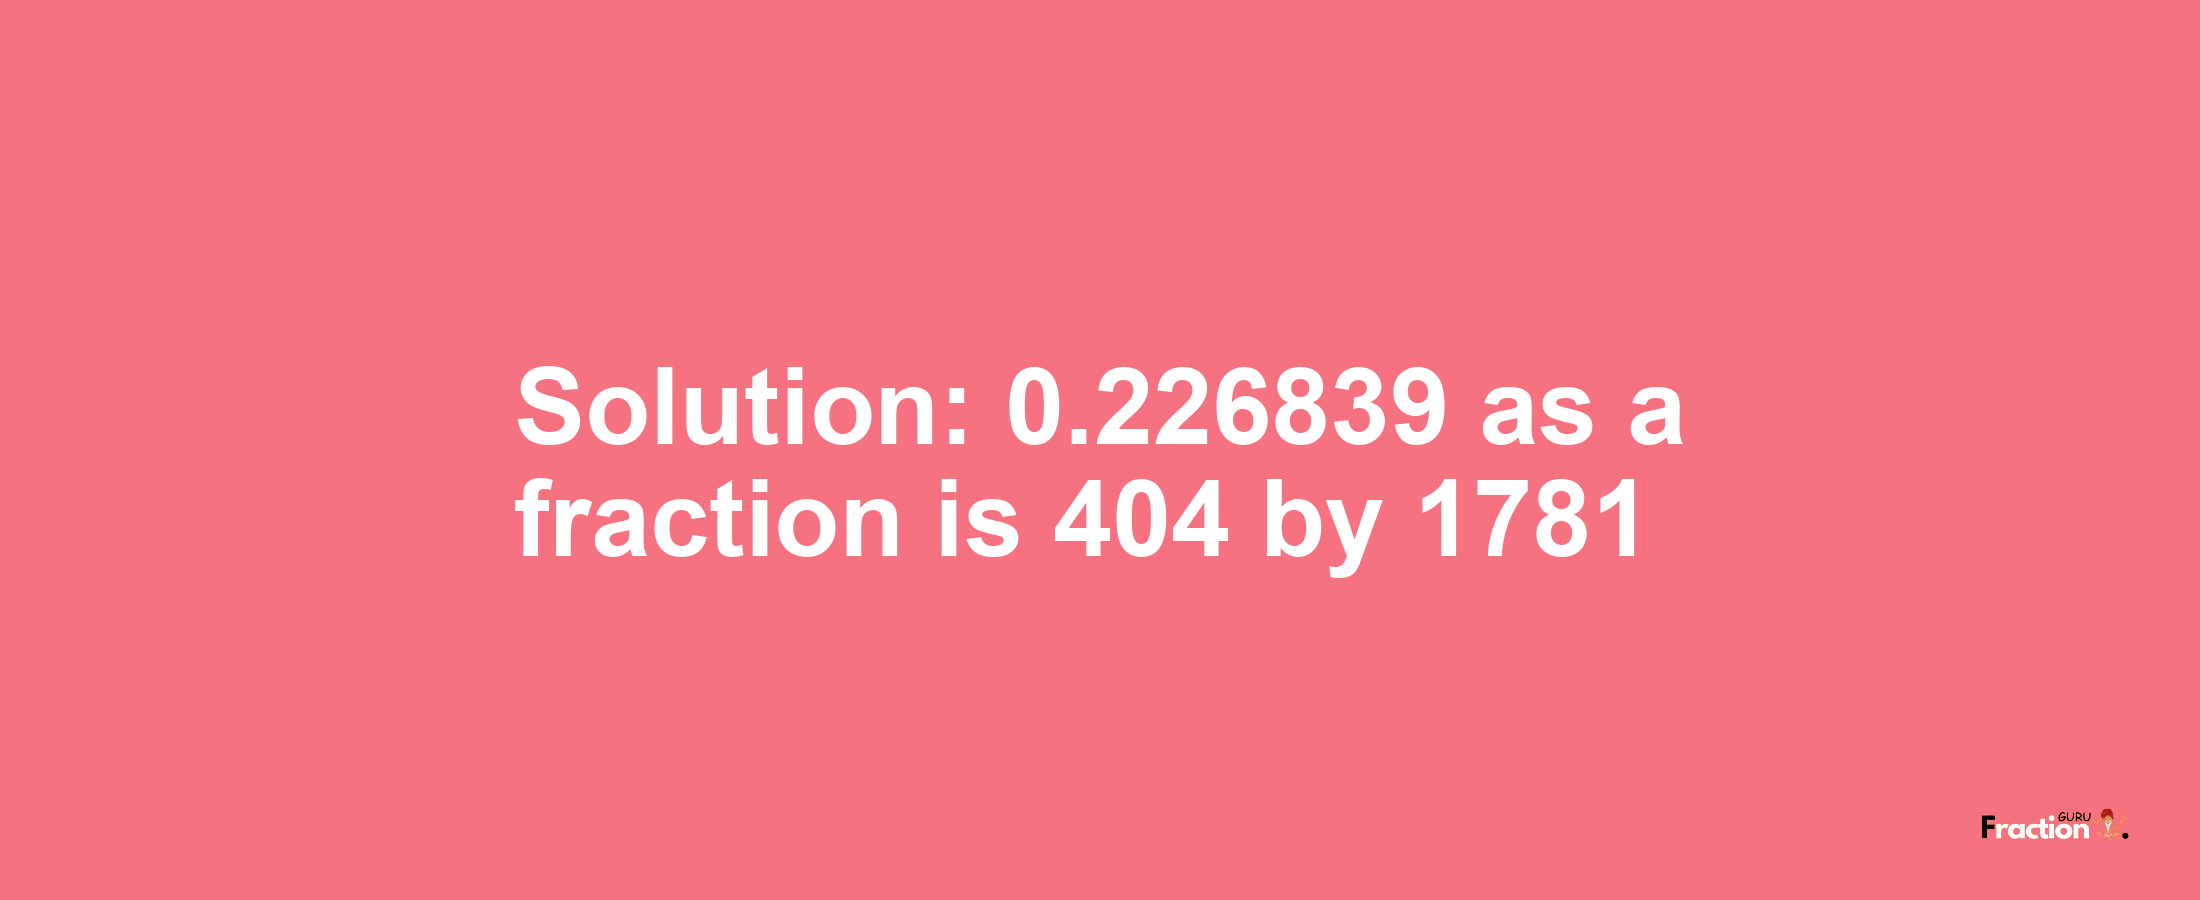 Solution:0.226839 as a fraction is 404/1781